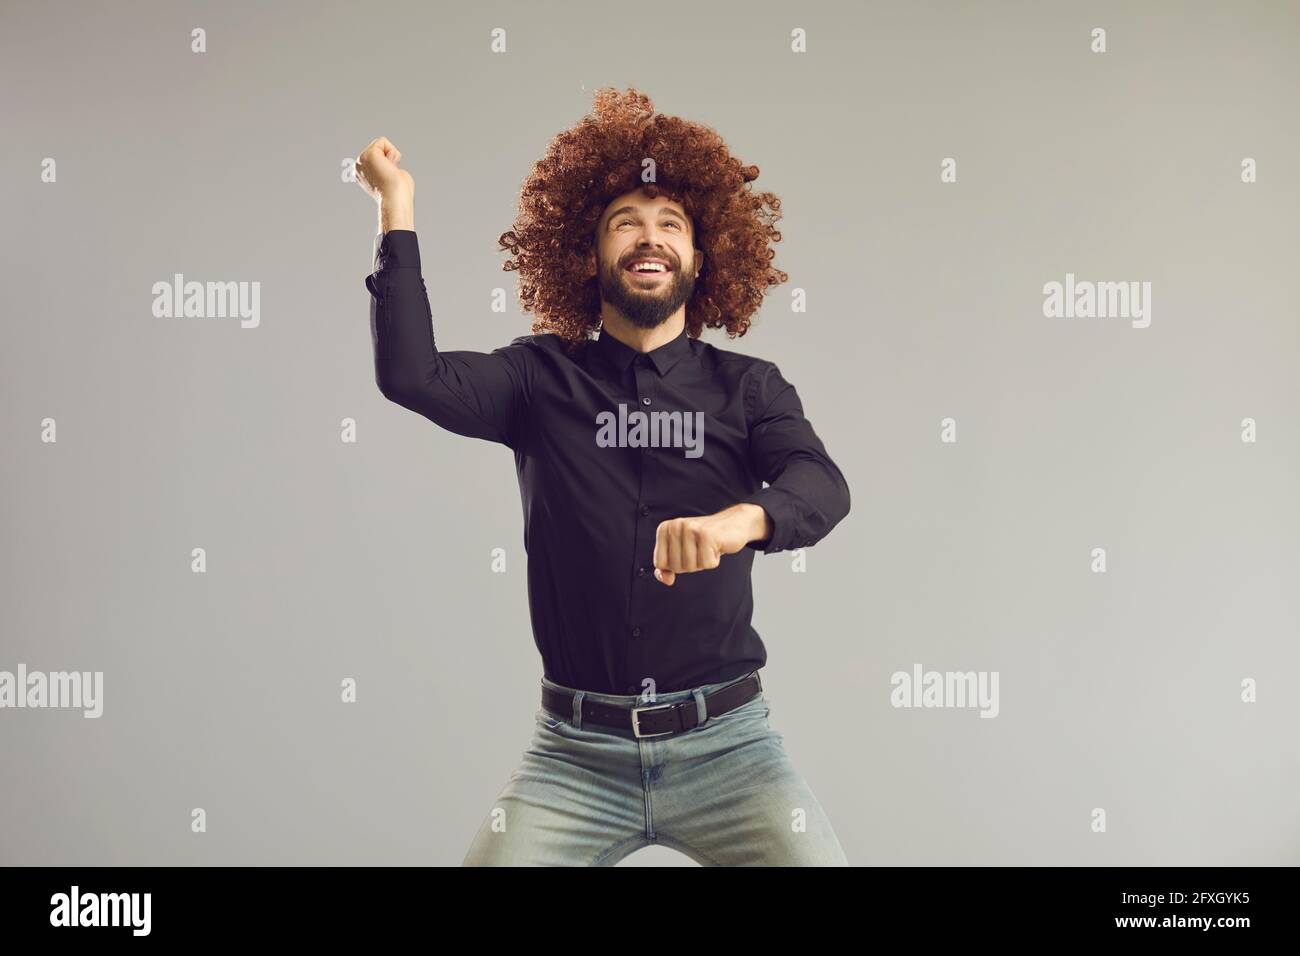 Happy young man in funny curly wig dancing gangnam style on gray studio background Stock Photo